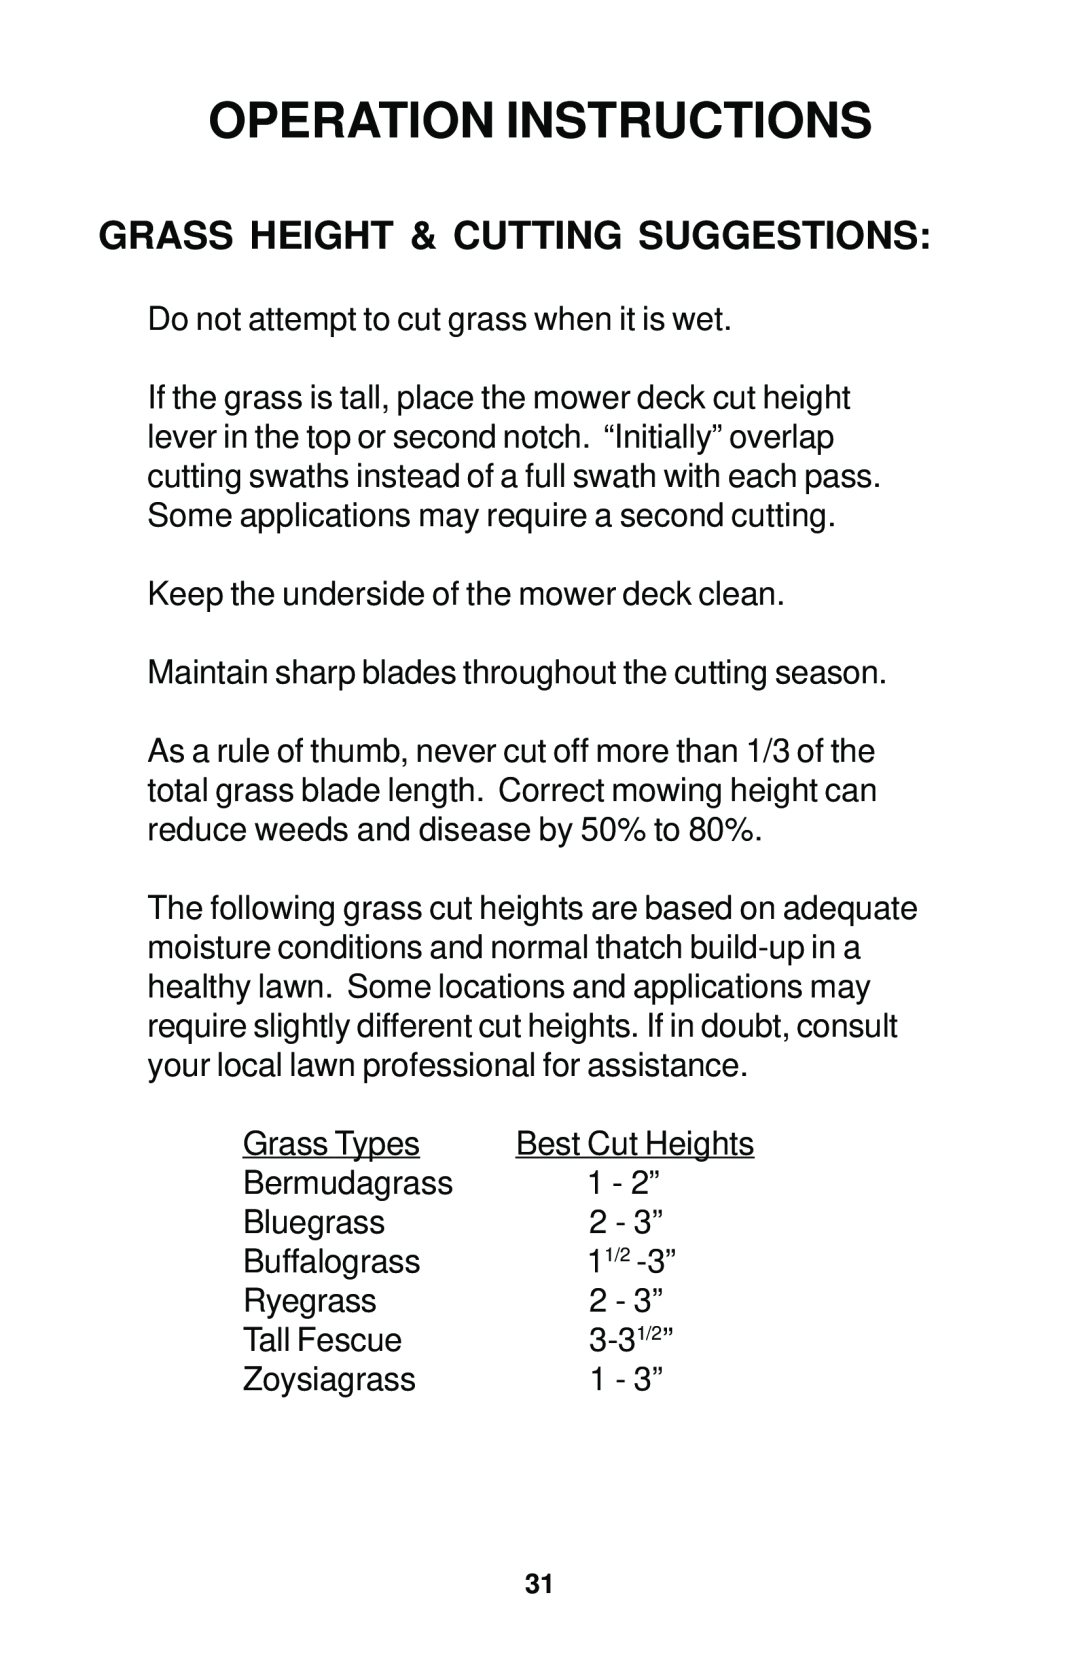 Dixon 12881-1104 manual Grass Height & Cutting Suggestions, Operation Instructions 